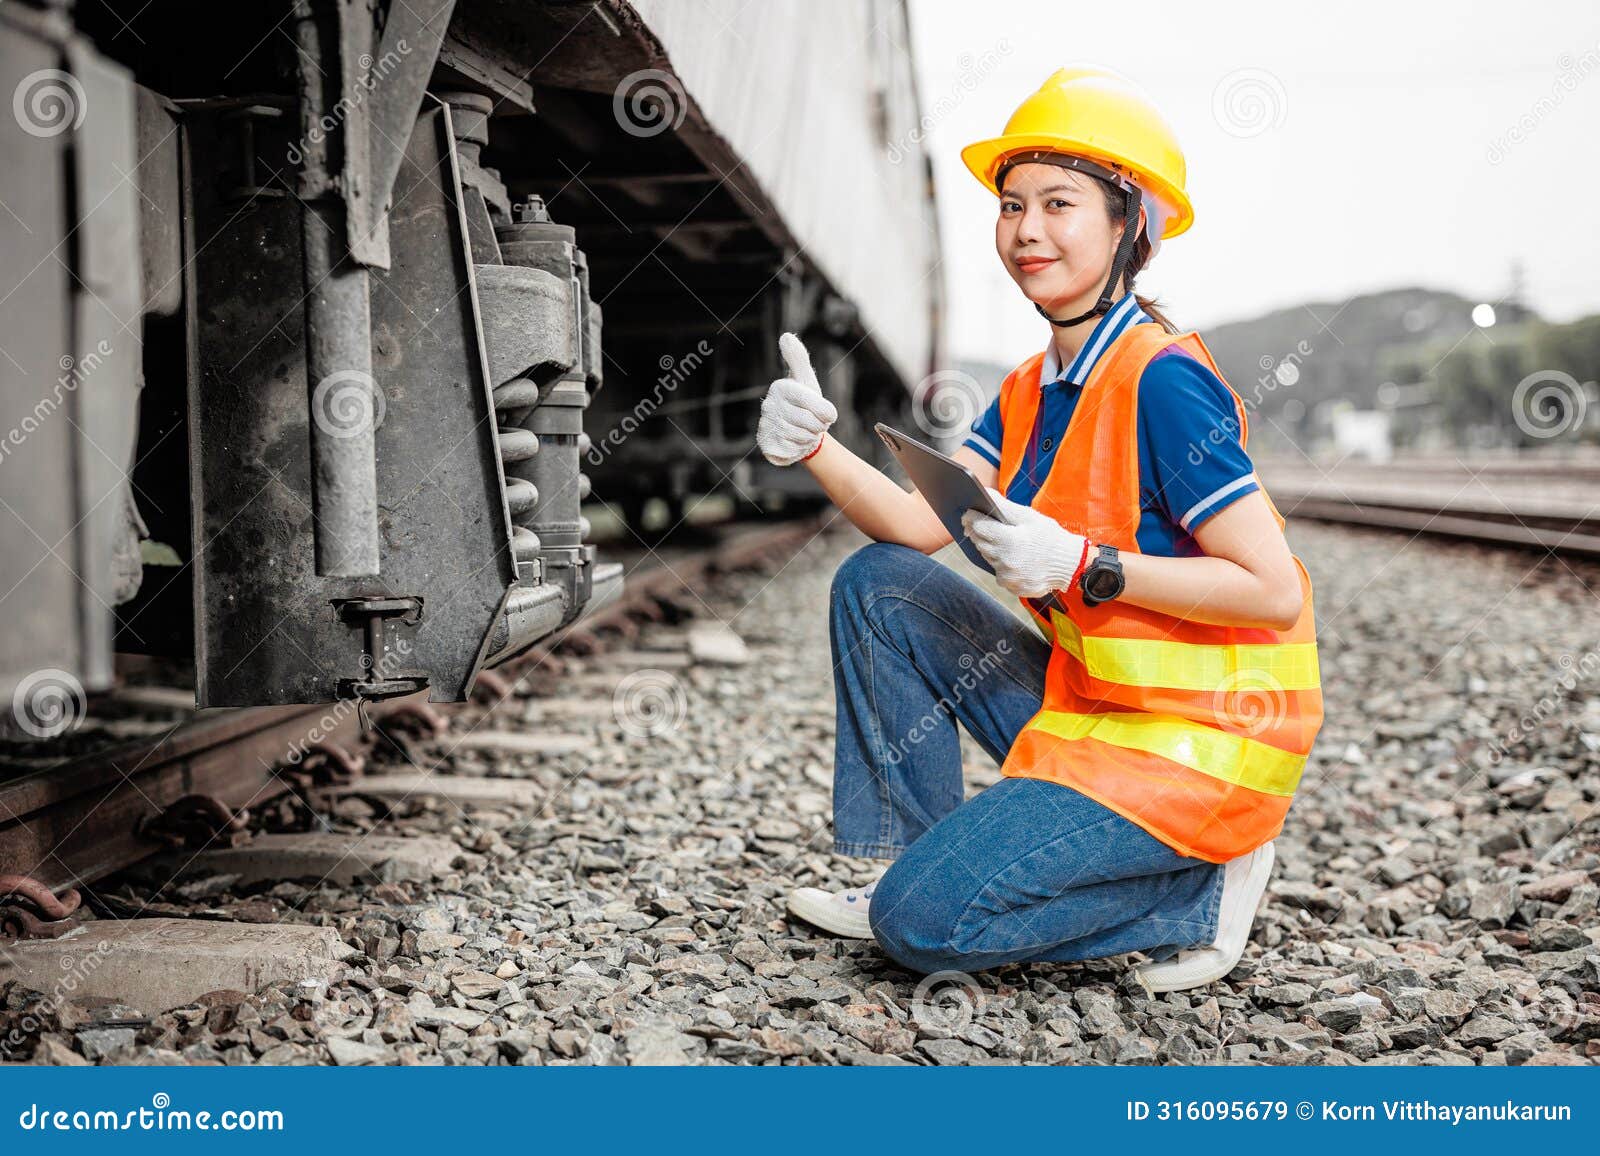 happy engineer women worker check service maintenance train wheel suspension confirm thumbs up good condition